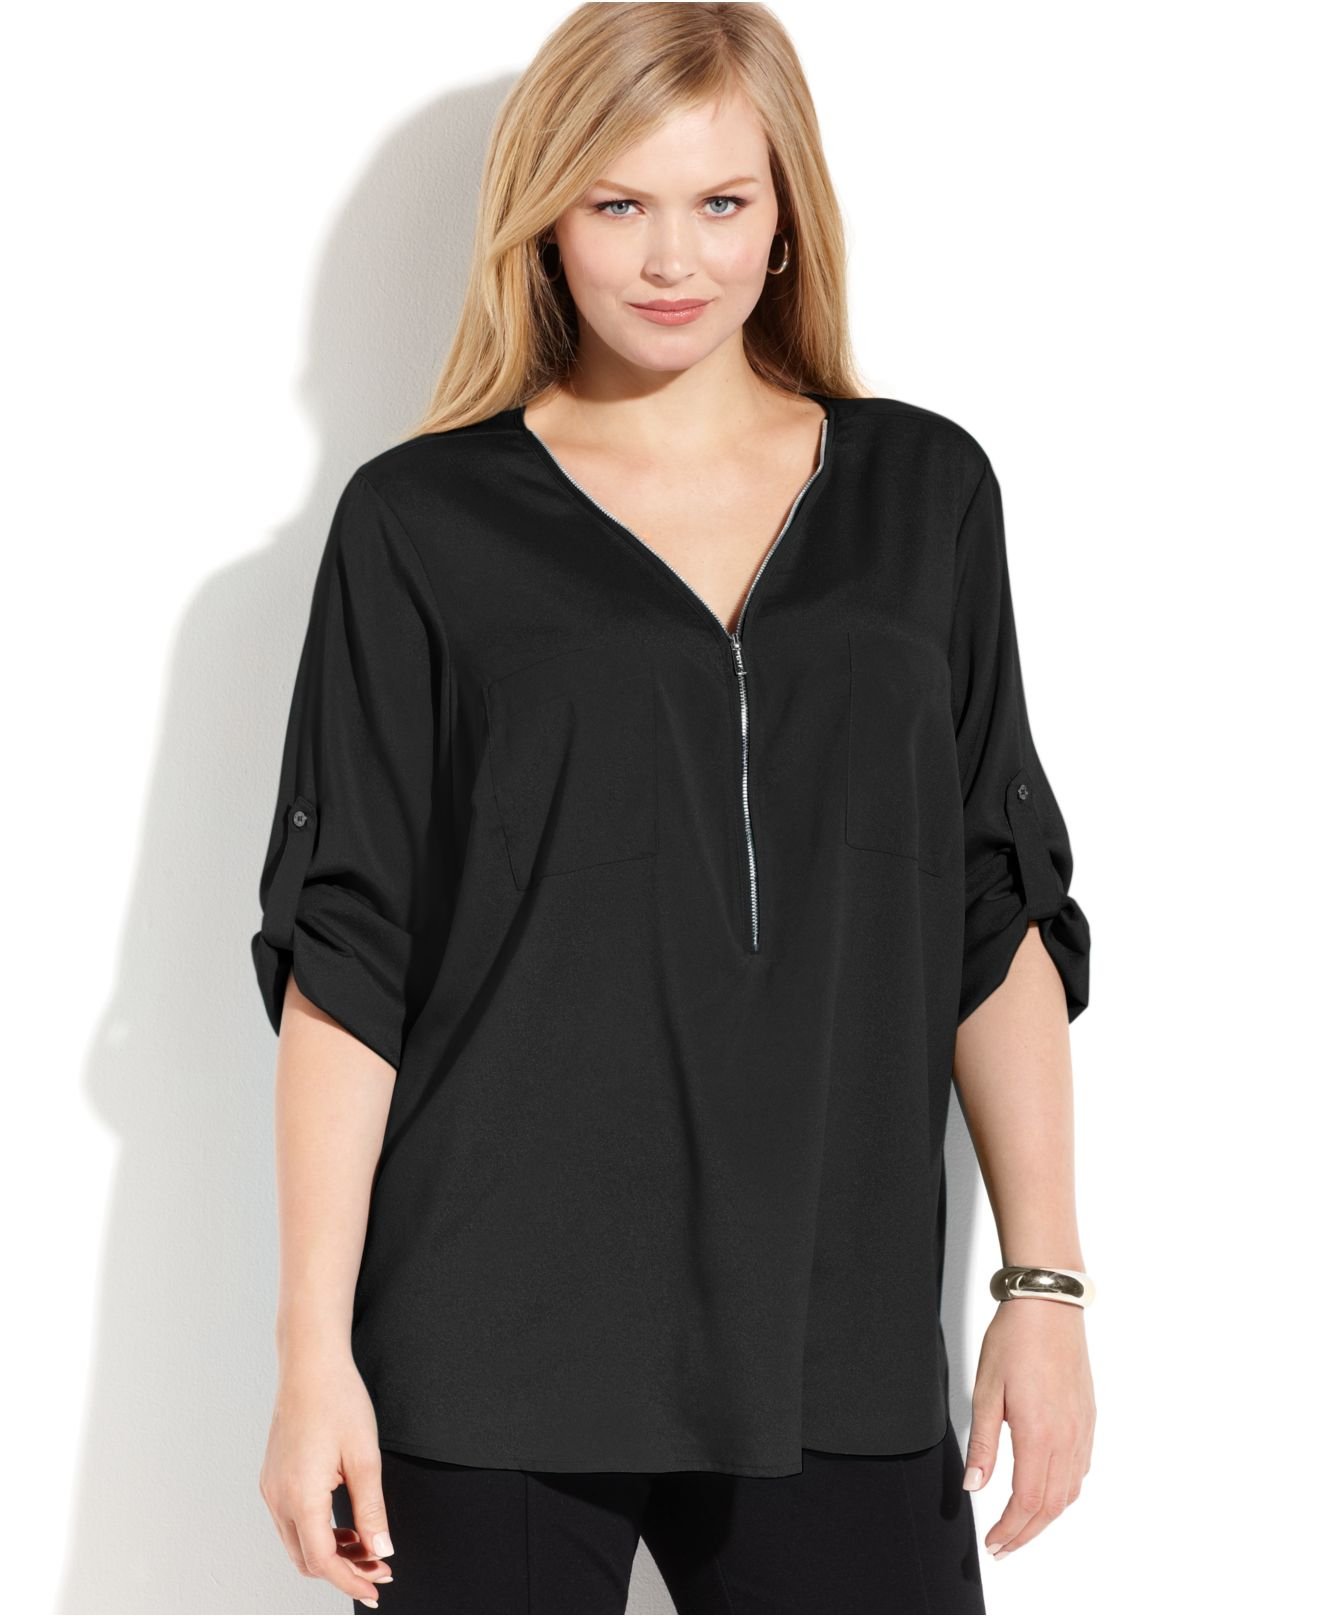 Lyst - Calvin Klein Plus Size Roll-Tab-Sleeve Zip-Front Blouse in Black